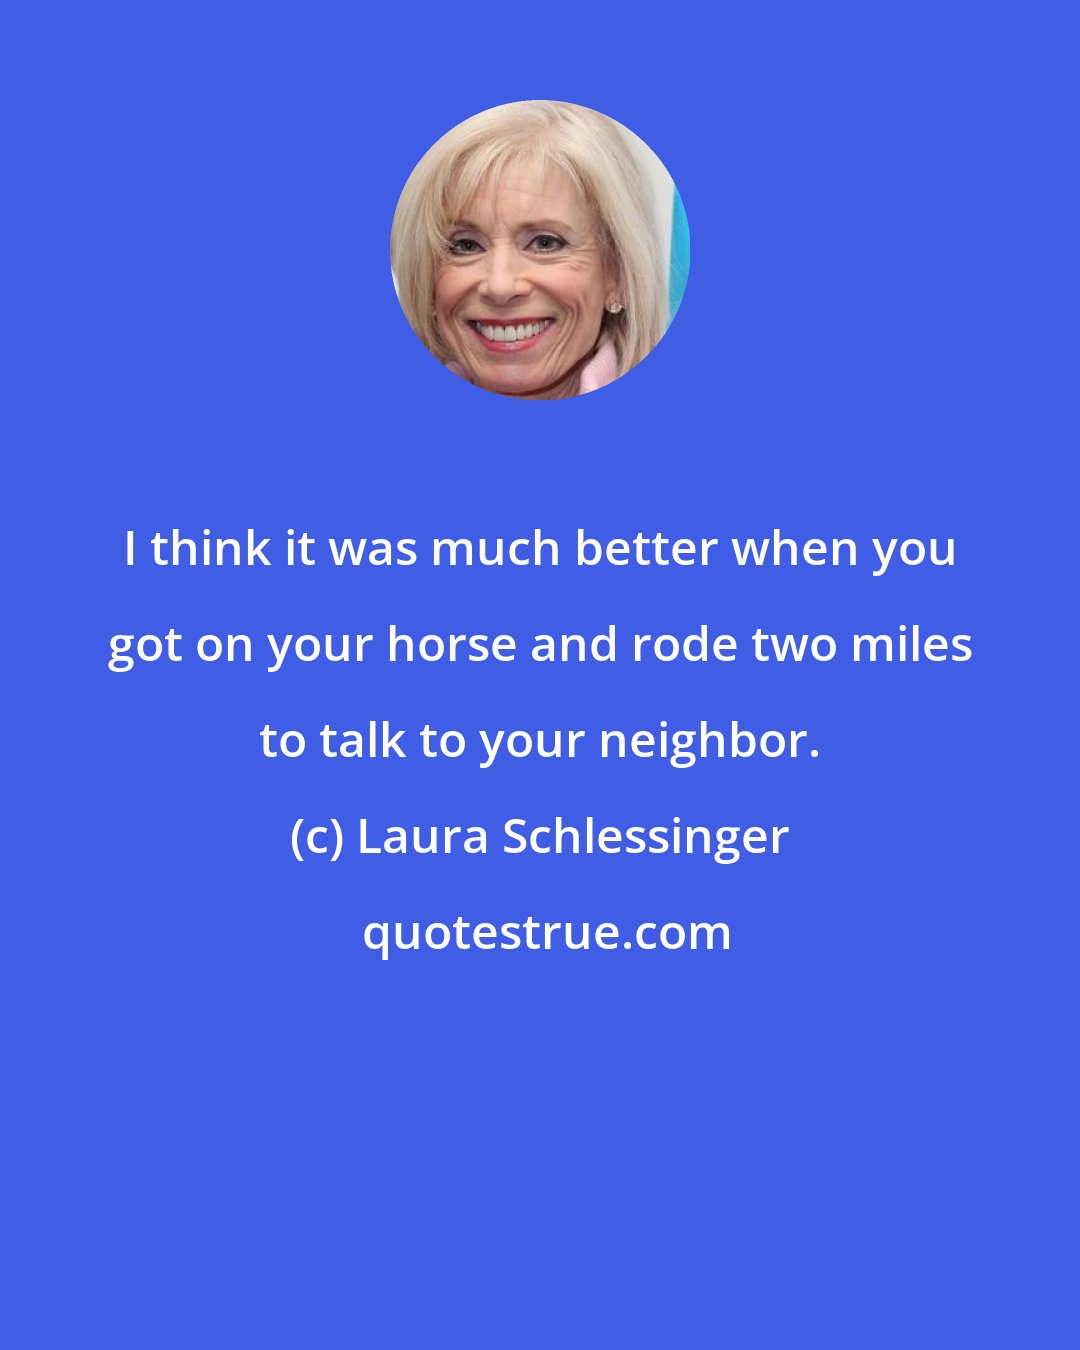 Laura Schlessinger: I think it was much better when you got on your horse and rode two miles to talk to your neighbor.